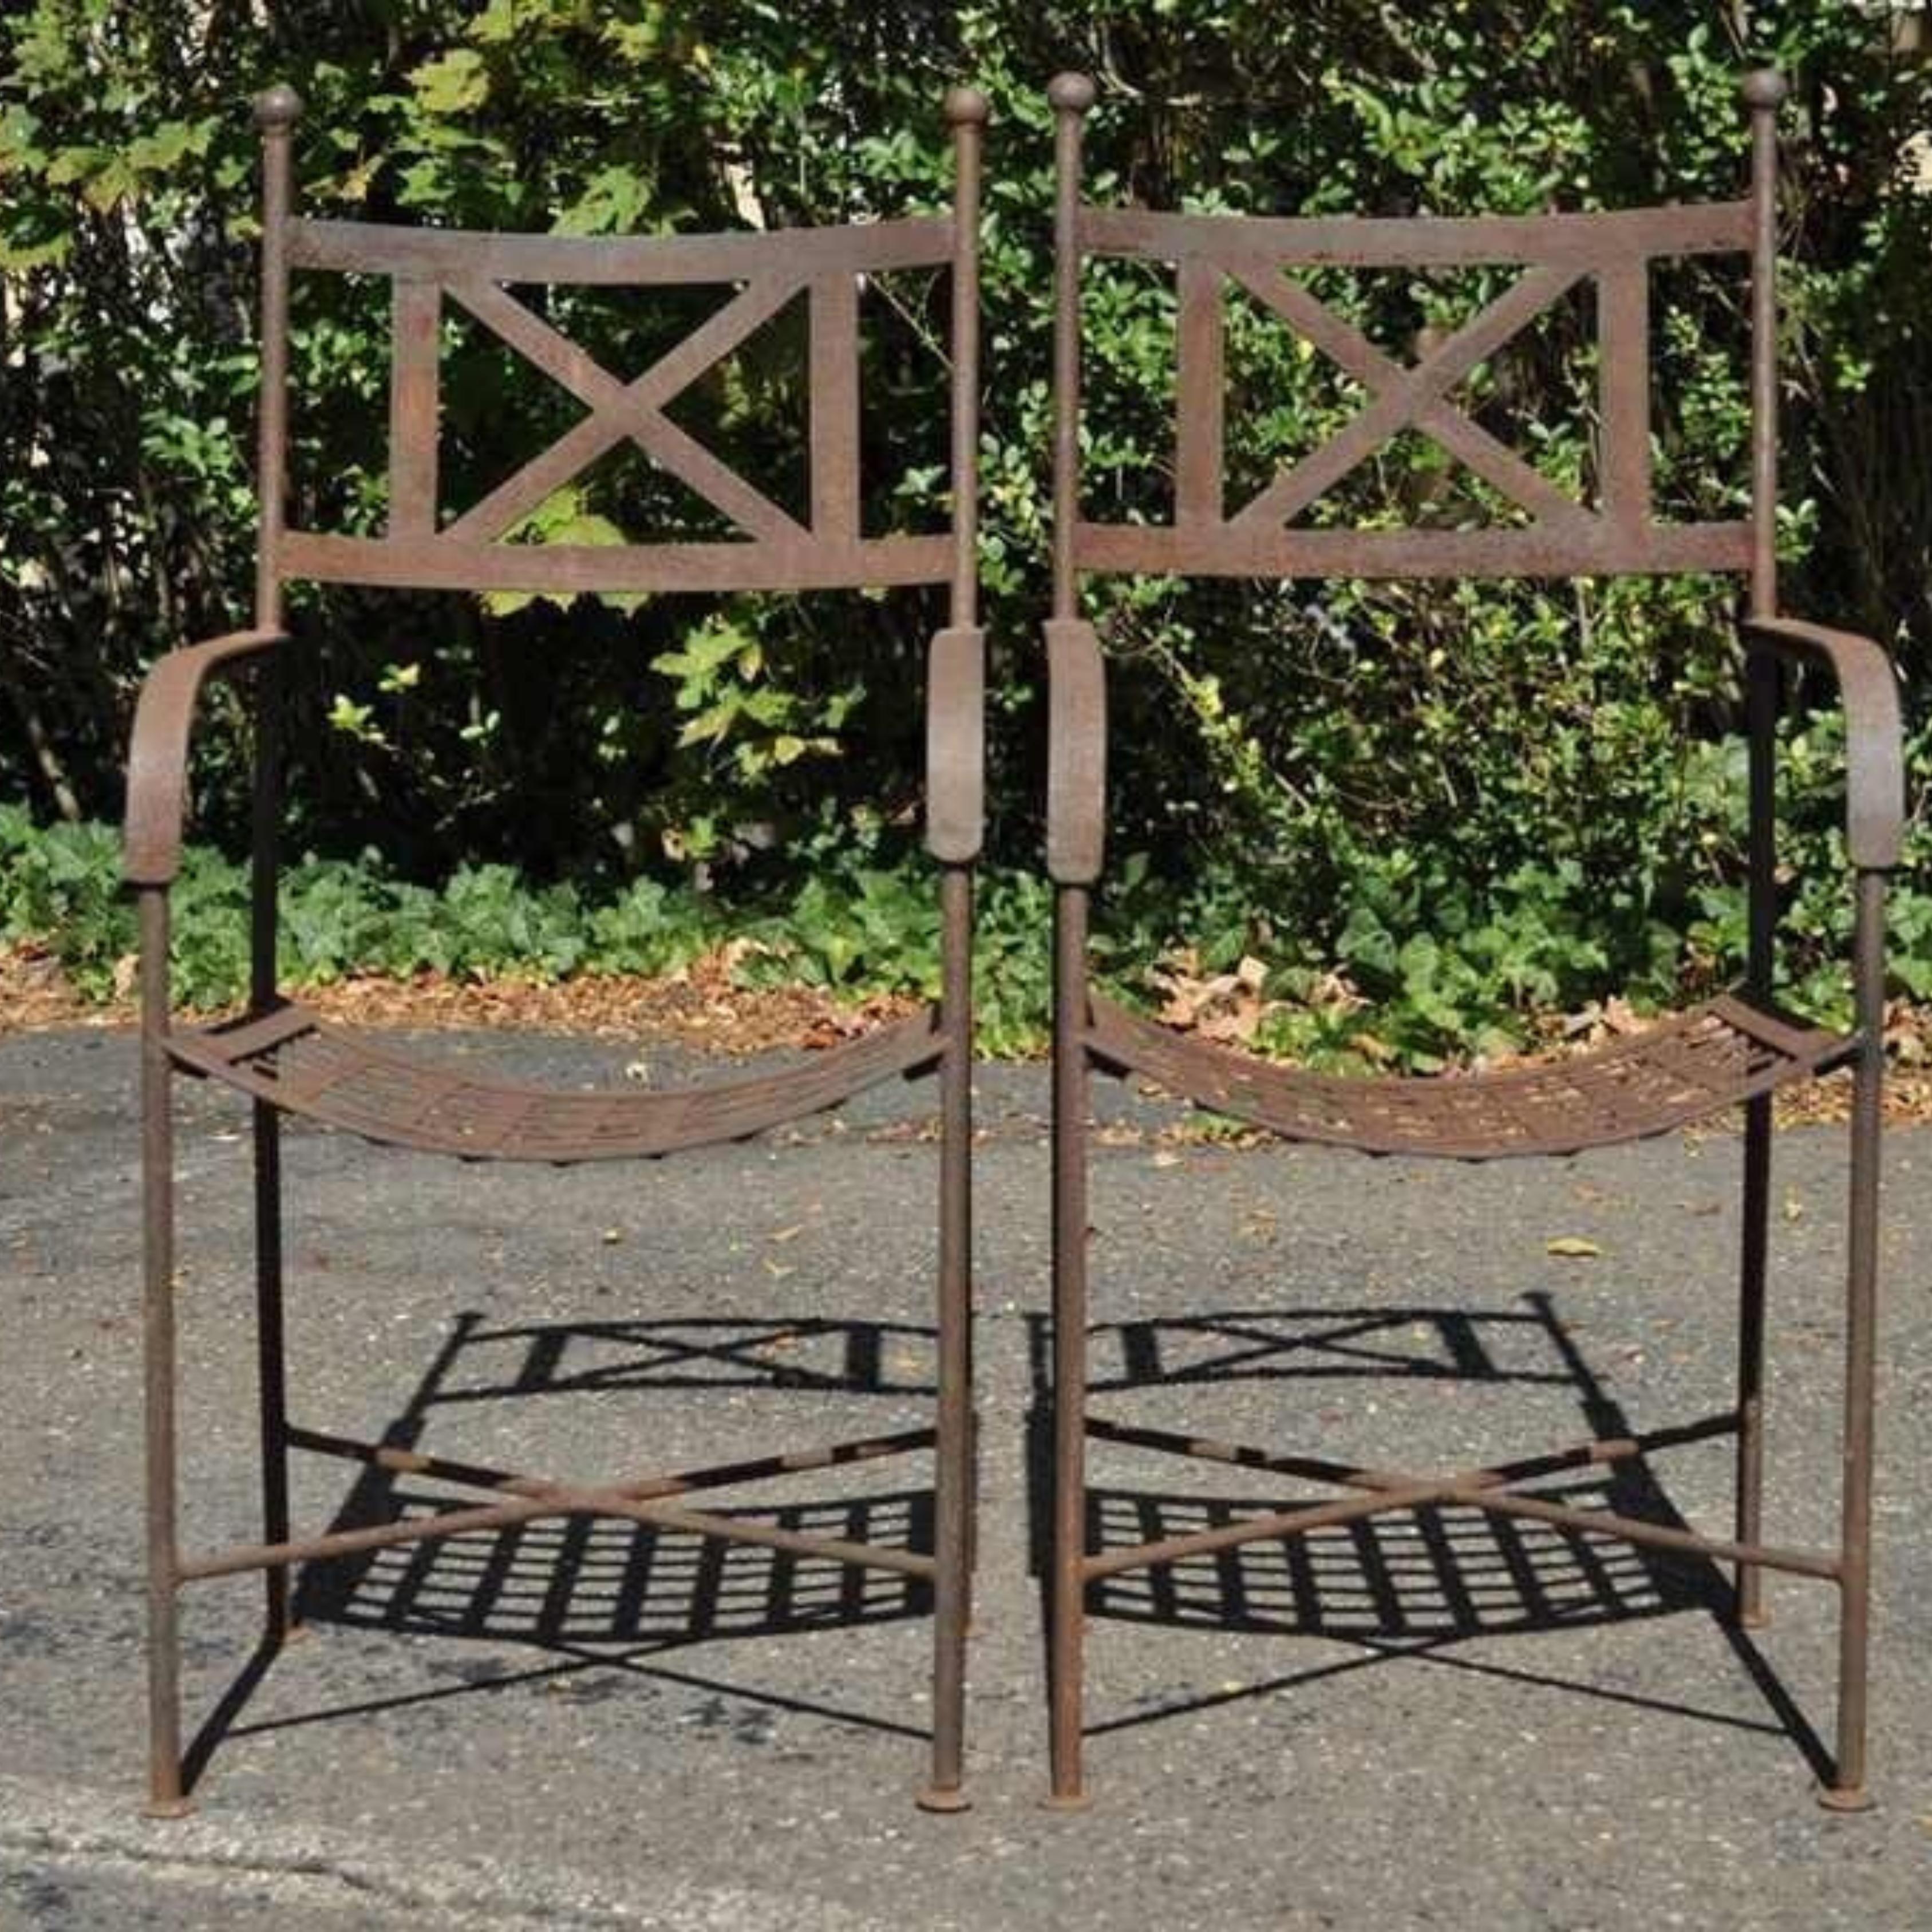 Vintage Neoclassical Regency Style Iron X Form Stretcher Garden Arm Chairs - a Pair. Item featured has sturdy construction with x-form stretcher base, riveted slat seats, weathered finish, very nice vintage set. Circa Early to Mid 1900's.